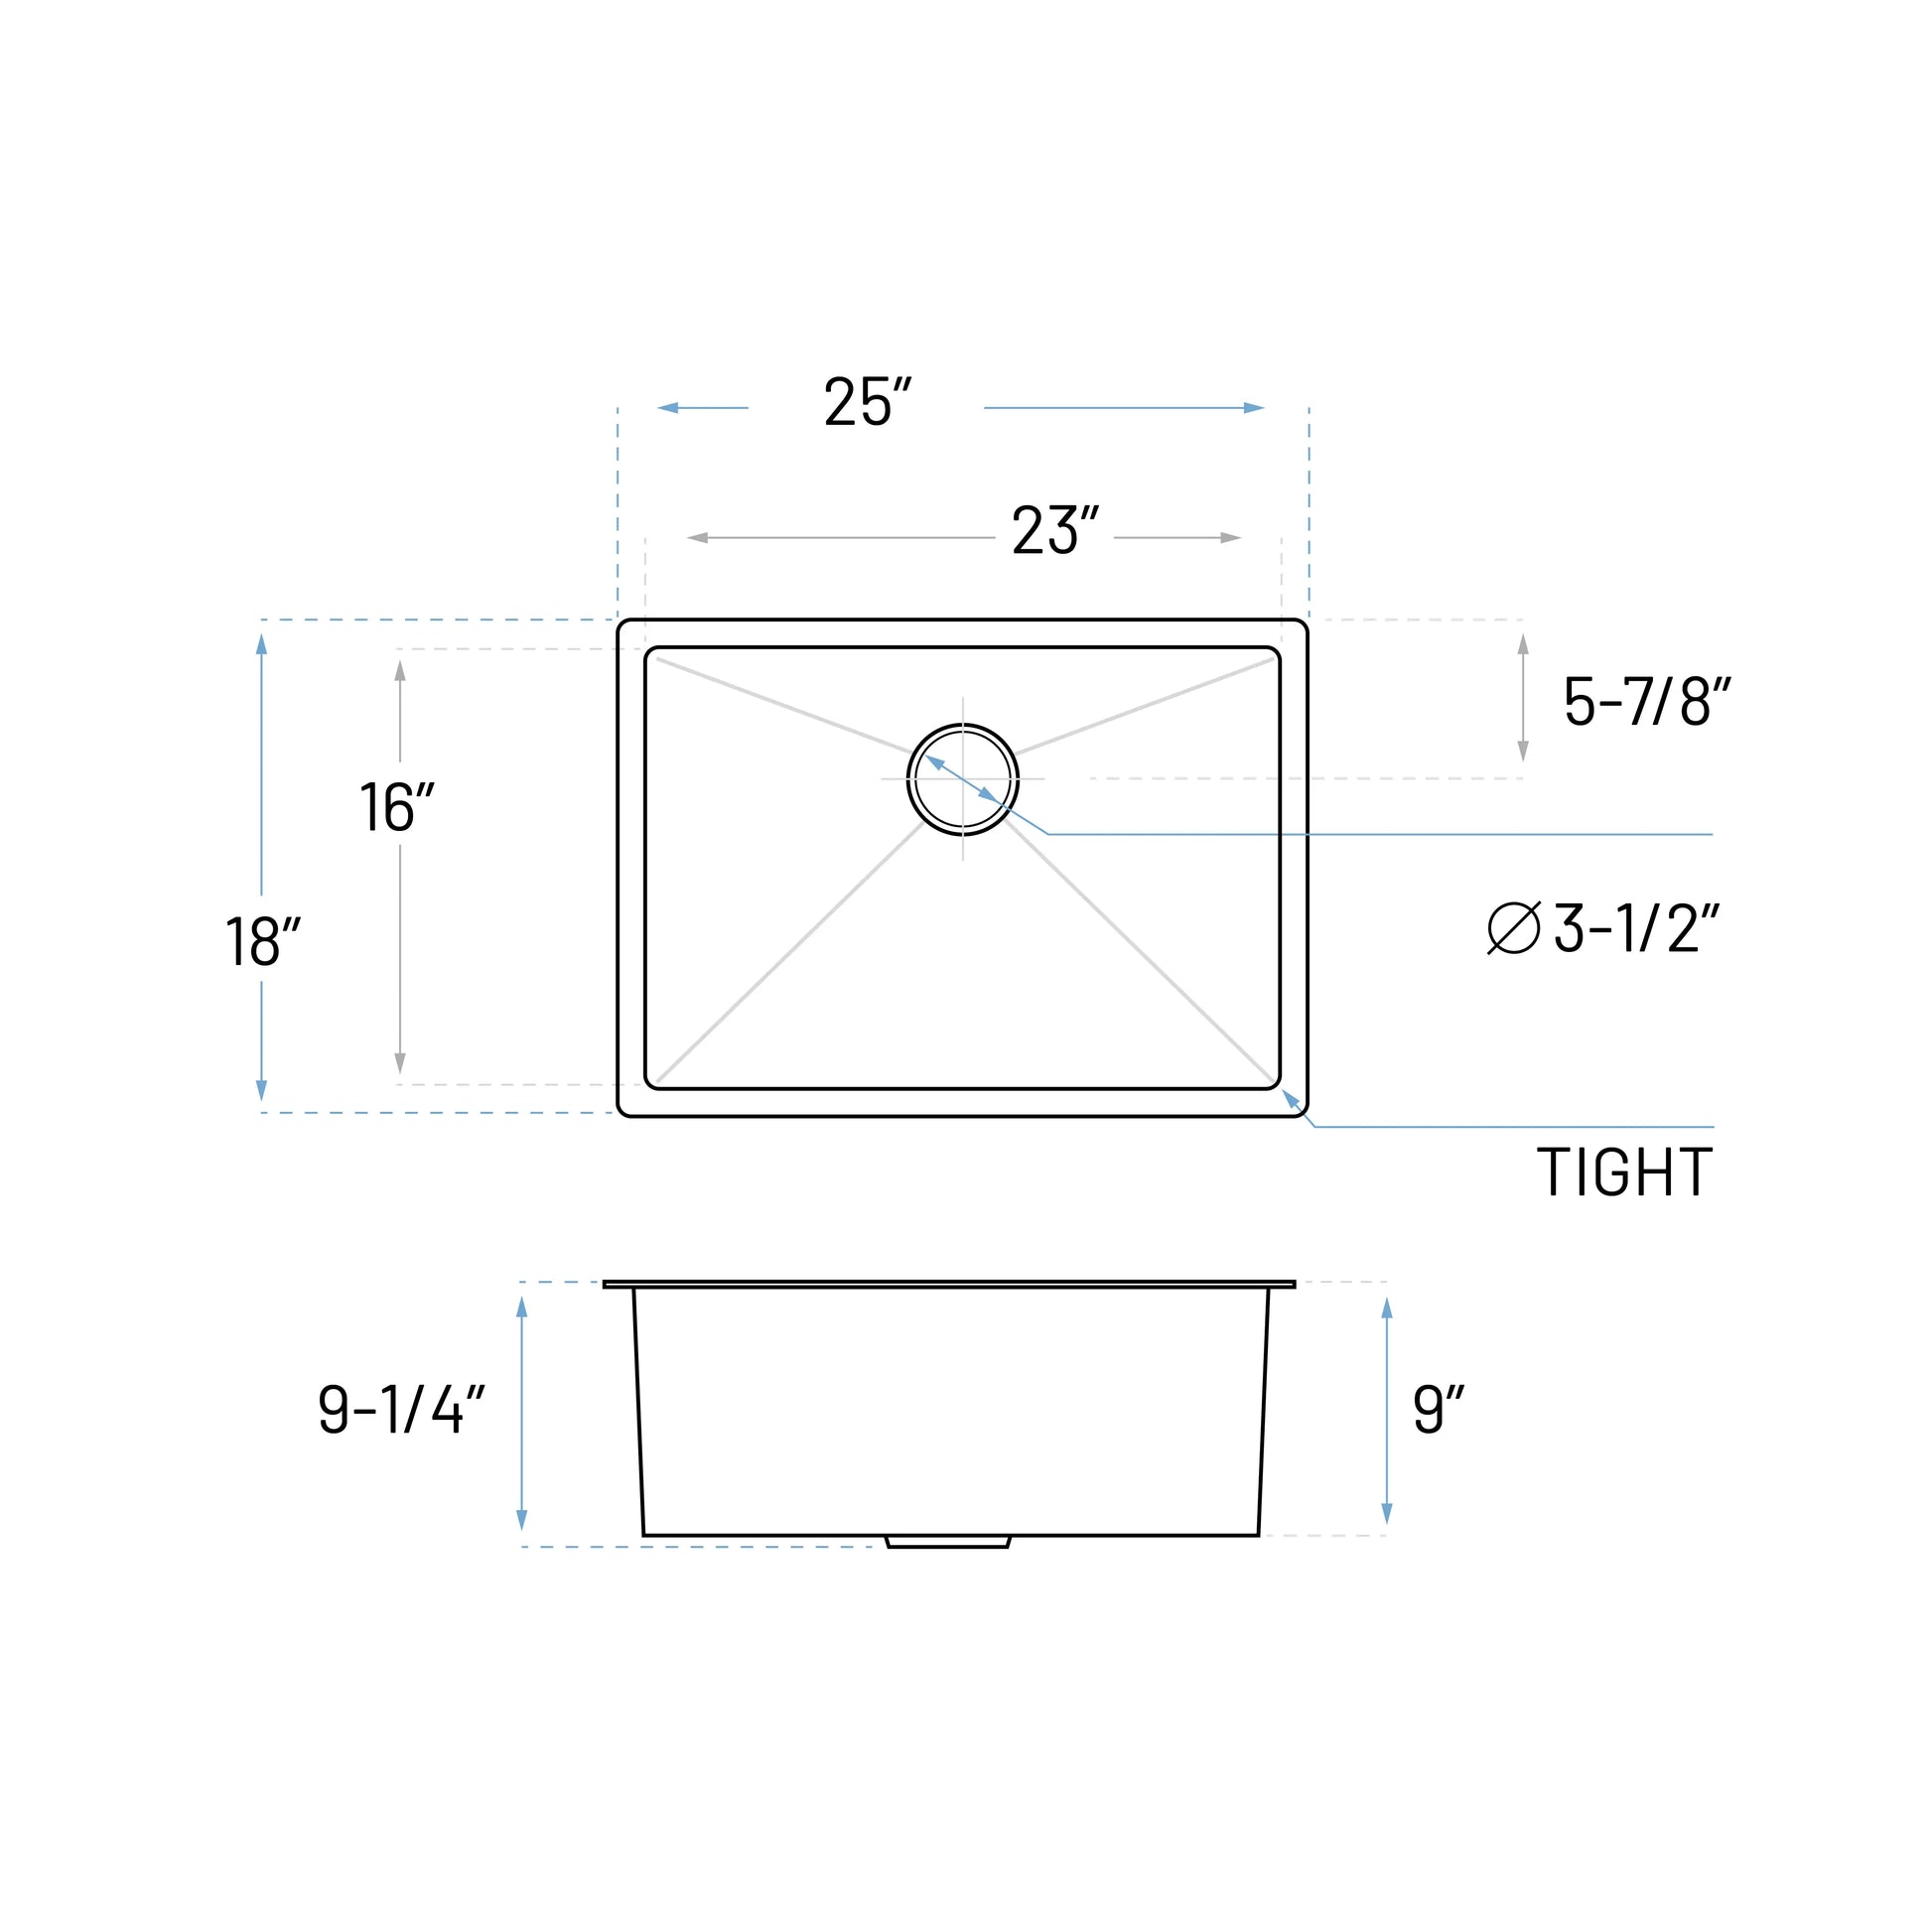 Technical Drawing of Handmade Stainless Steel Undermount Kitchen Sink